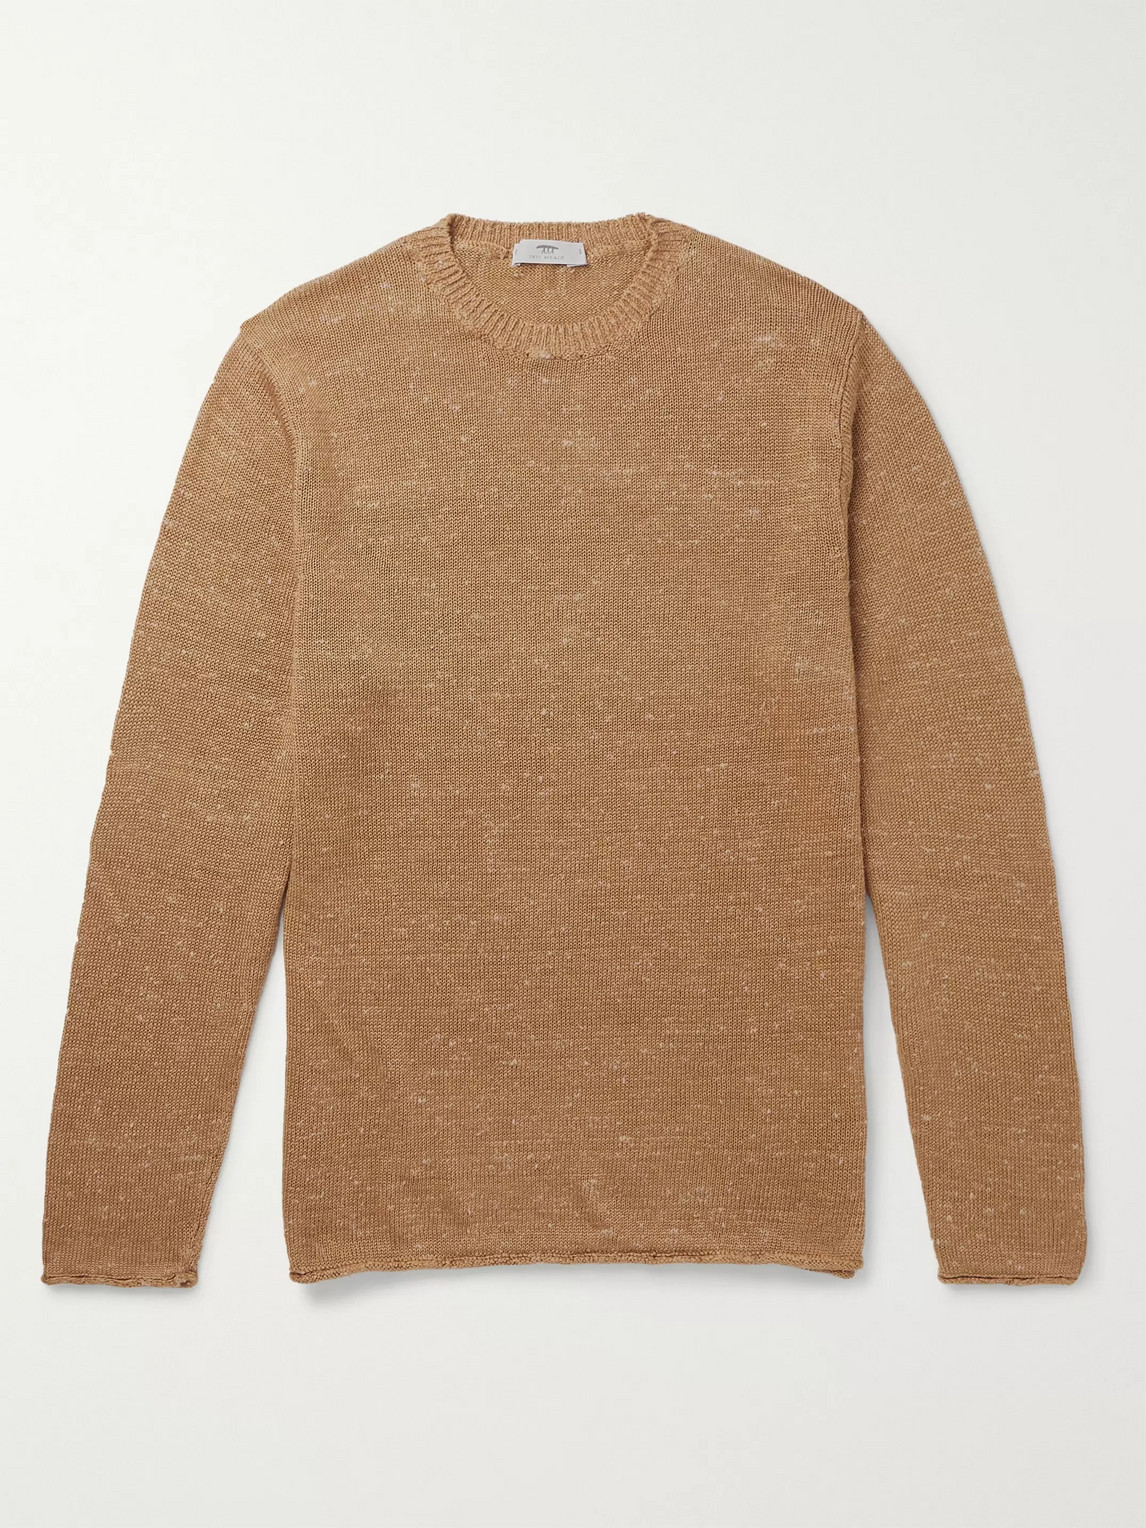 Inis Meain Donegal Linen And Silk-blend Jumper In Brown